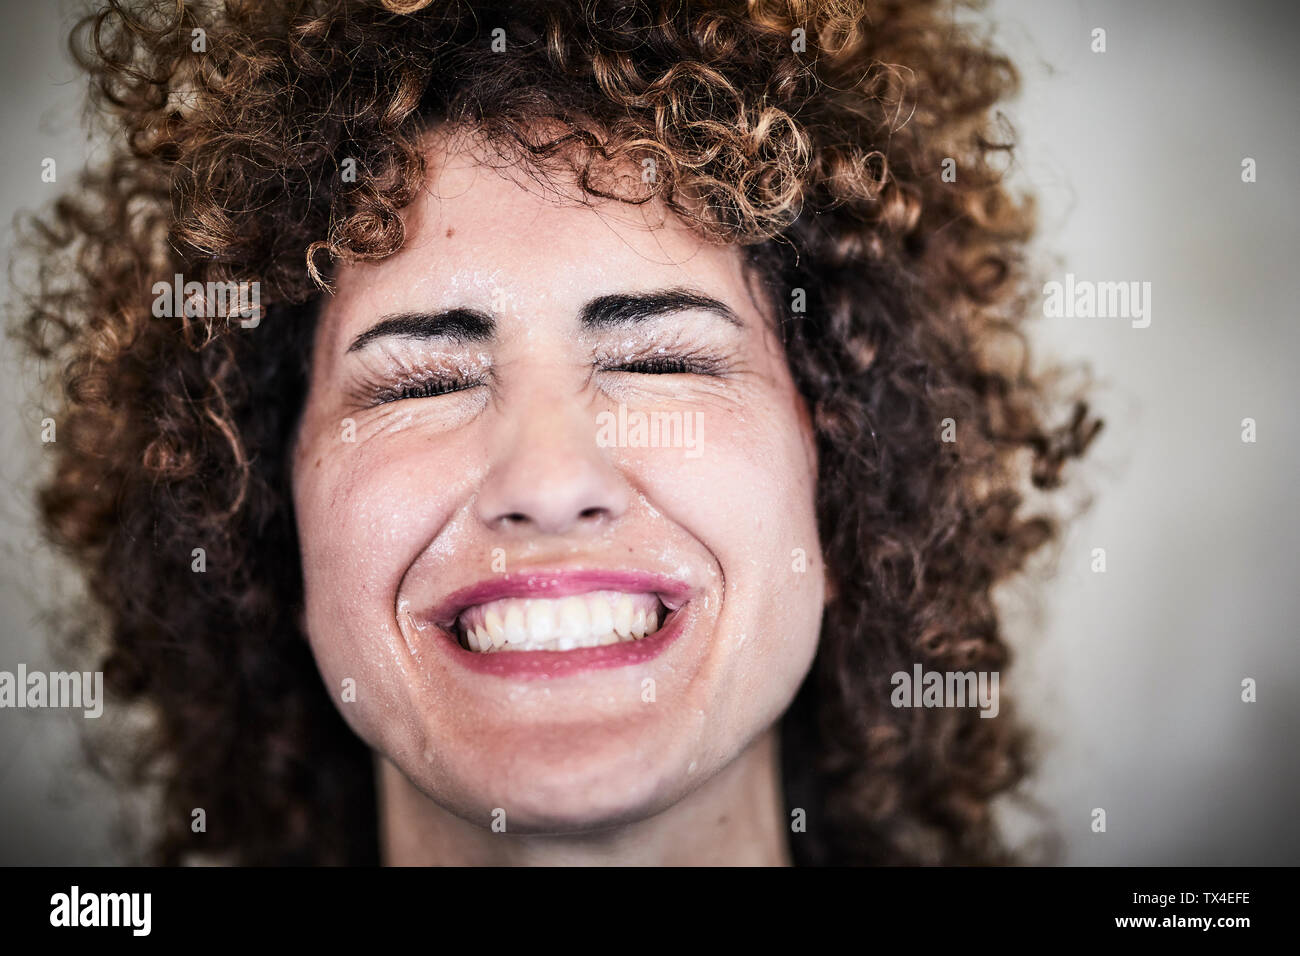 Portrait of sweating woman with curly hair Stock Photo